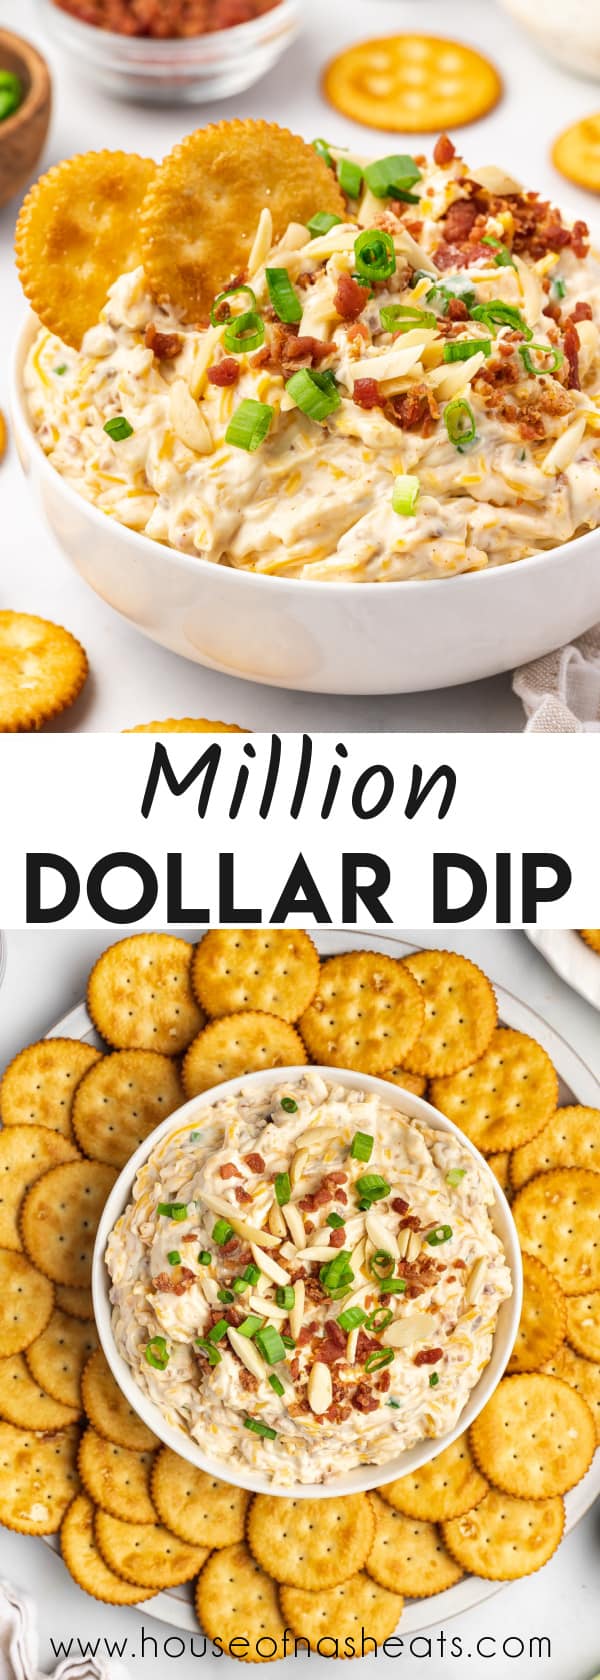 A collage of images of million dollar dip with text overlay.